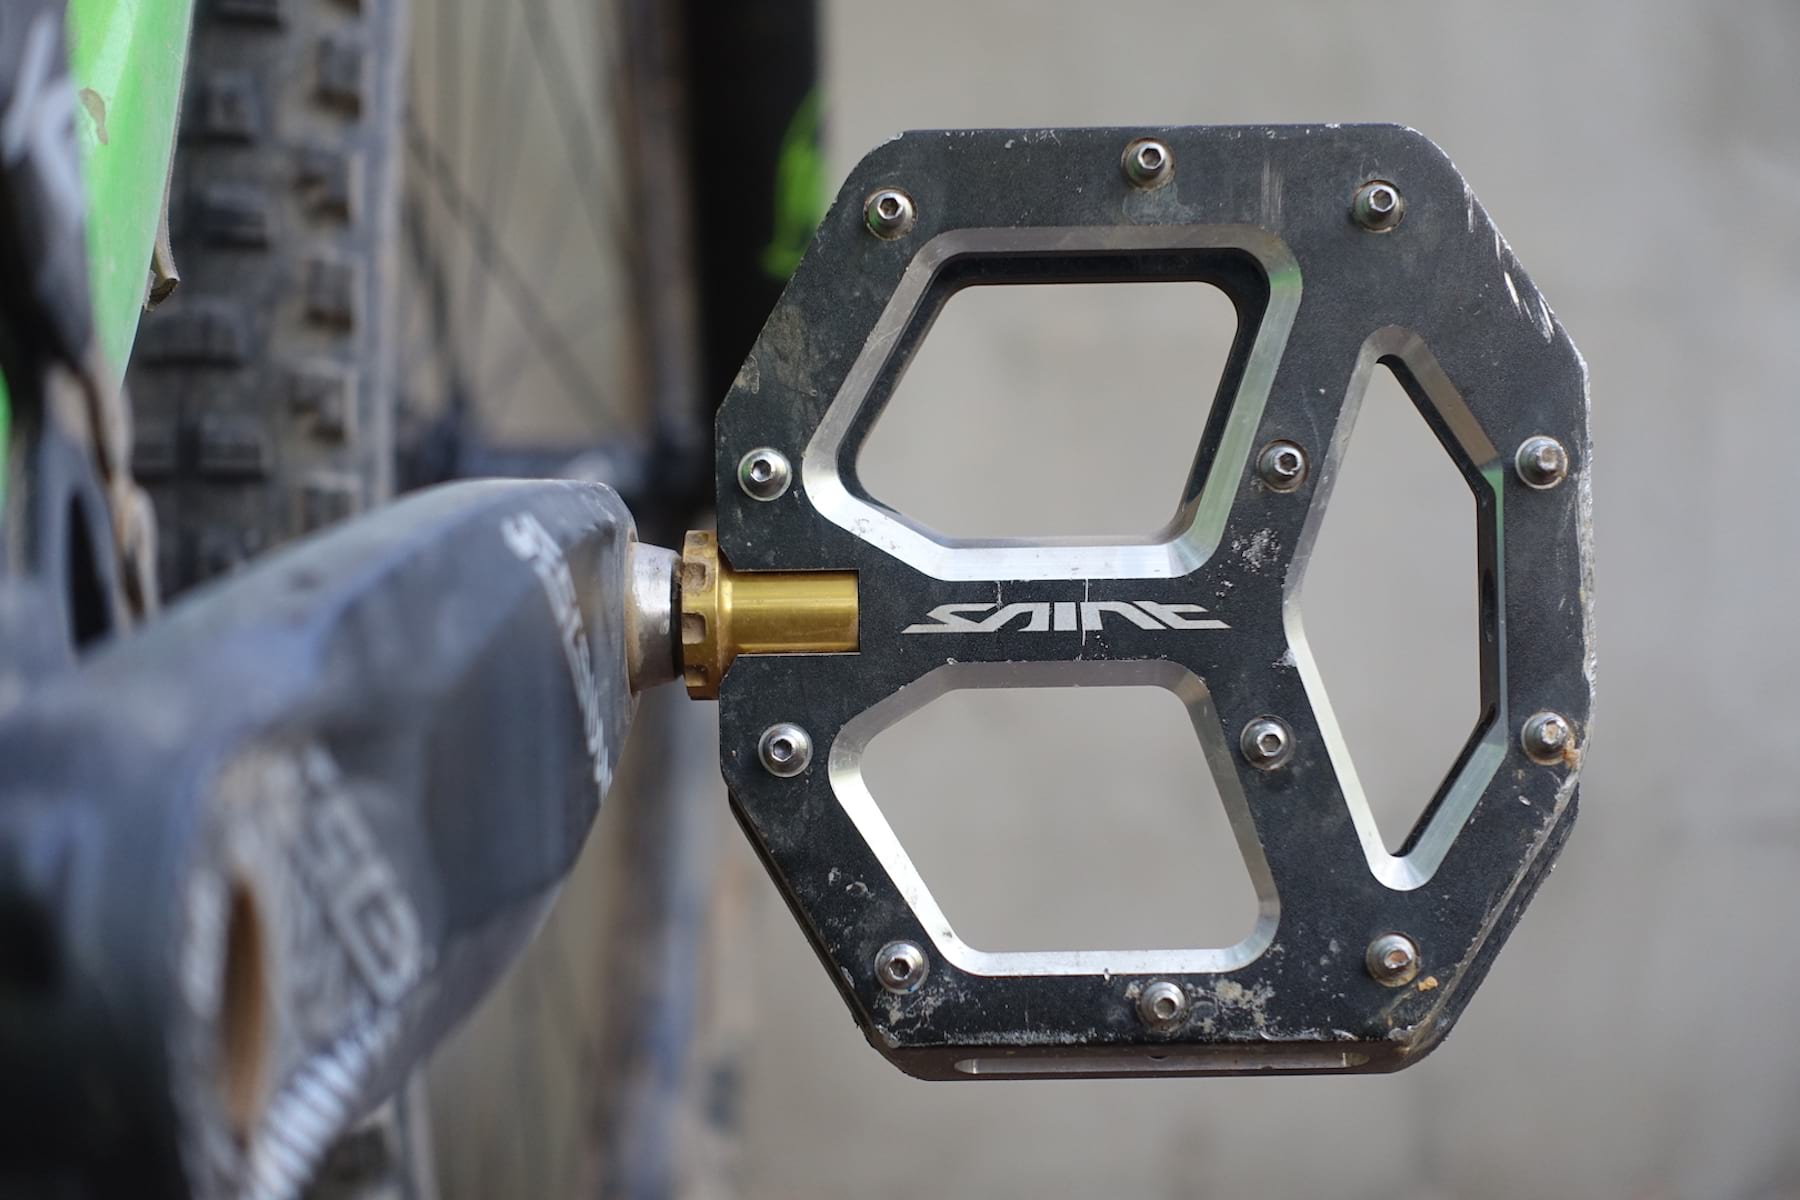 regnskyl lotus Gør alt med min kraft Review | Shimano goes for mega bearing durability with the tough-as Saint  M828 flat pedals - Singletrack World Magazine